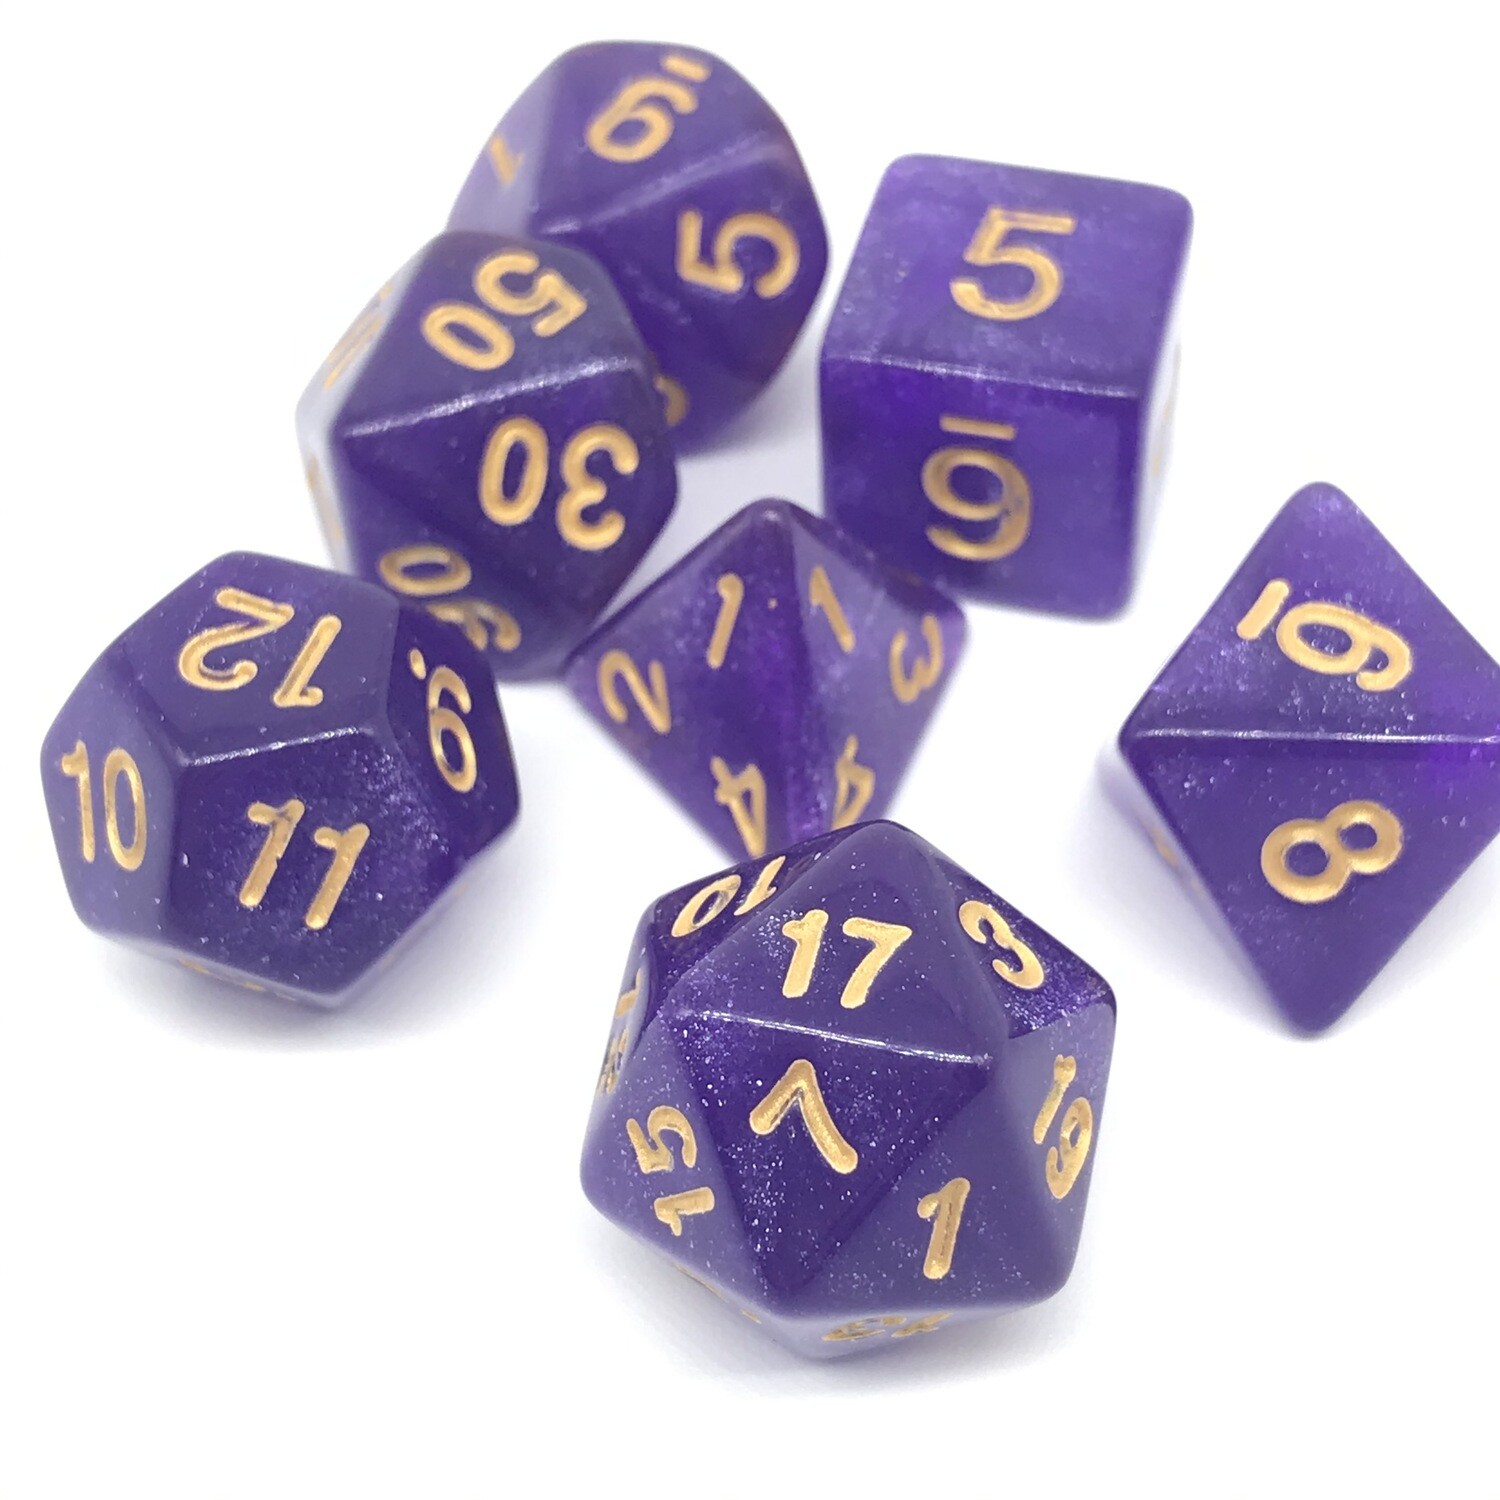 Dice Set - Purple sparkly with gold numbers